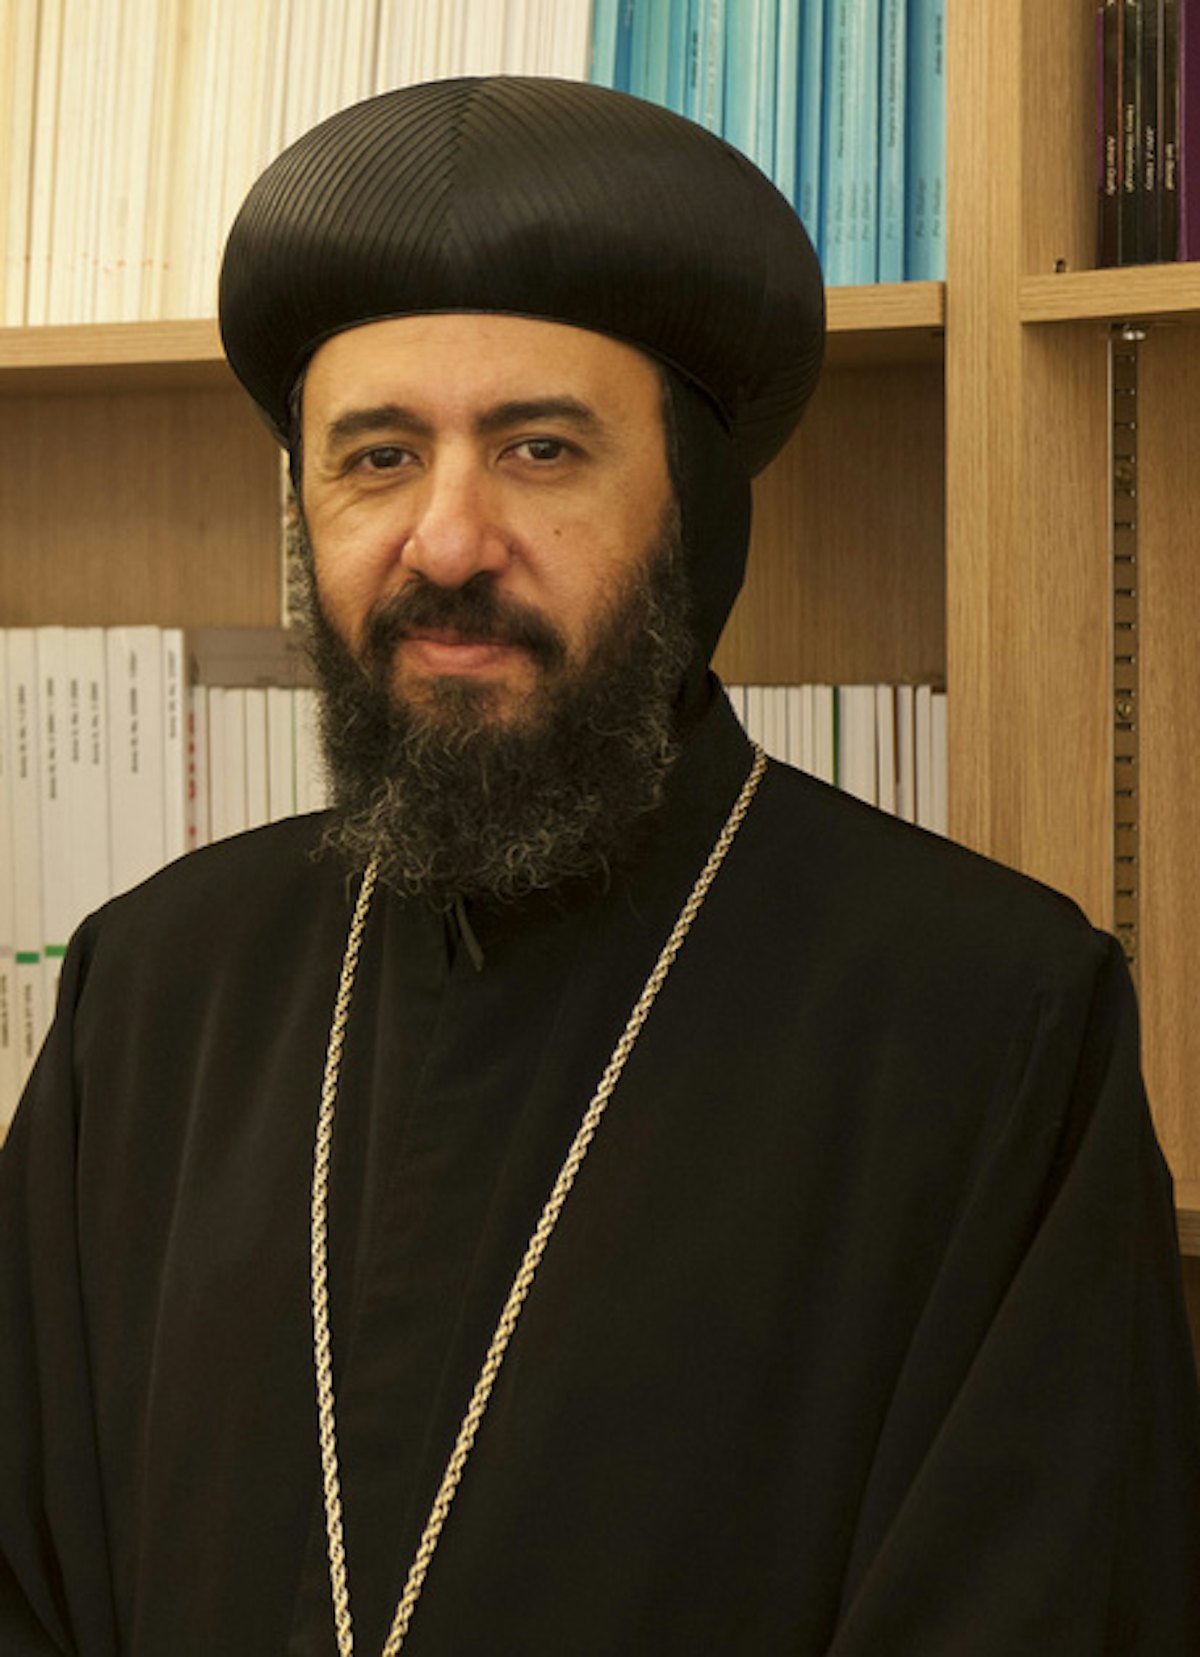 Bishop Angaelos of the Coptic Orthodox Church in the UK. In his recent statement, Bishop Angaelos praises Ayatollah Tehrani's gesture, saying he prays that the promotion of tolerance and coexistence will “become increasingly manifest not only in Iran but across the Middle East and the world.”